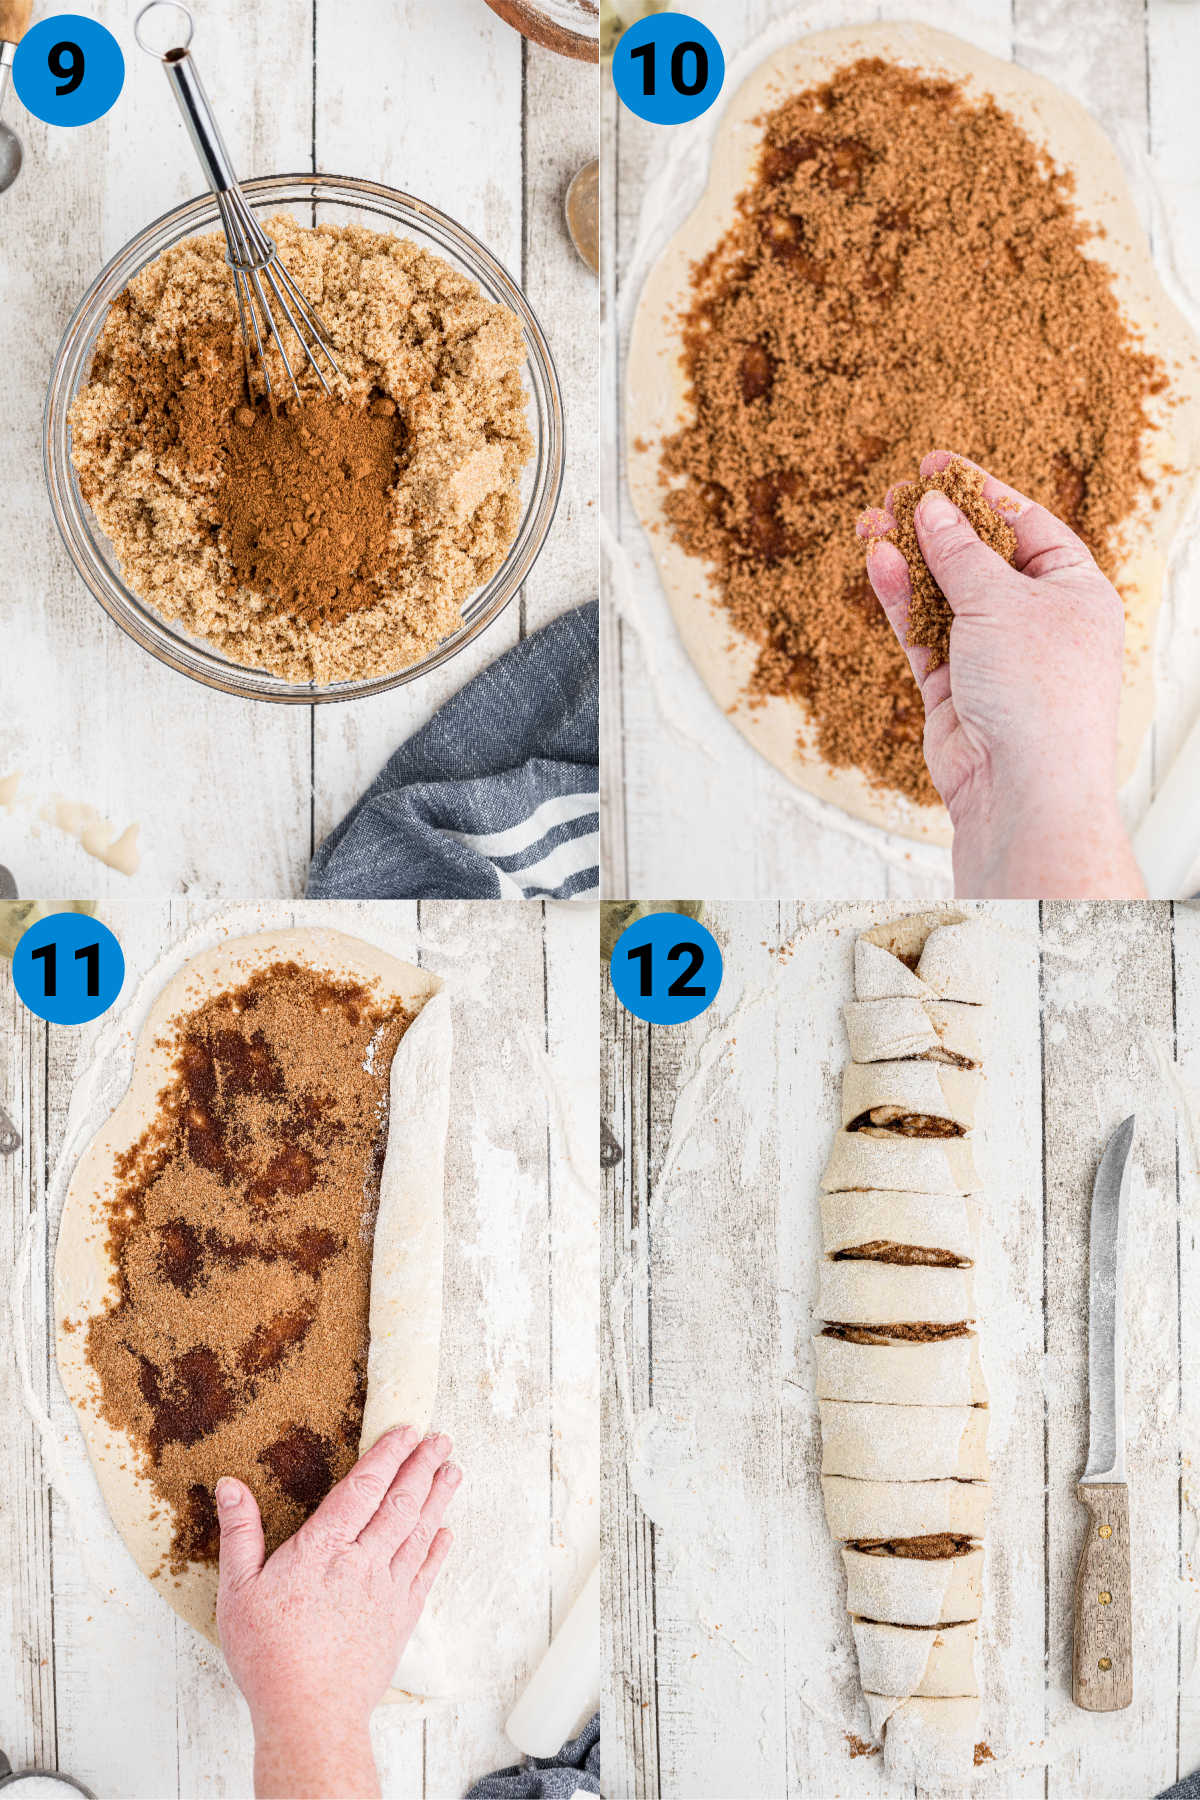 A collage of four images showing how to make Amish Cinnamon rolls, steps 9-12.